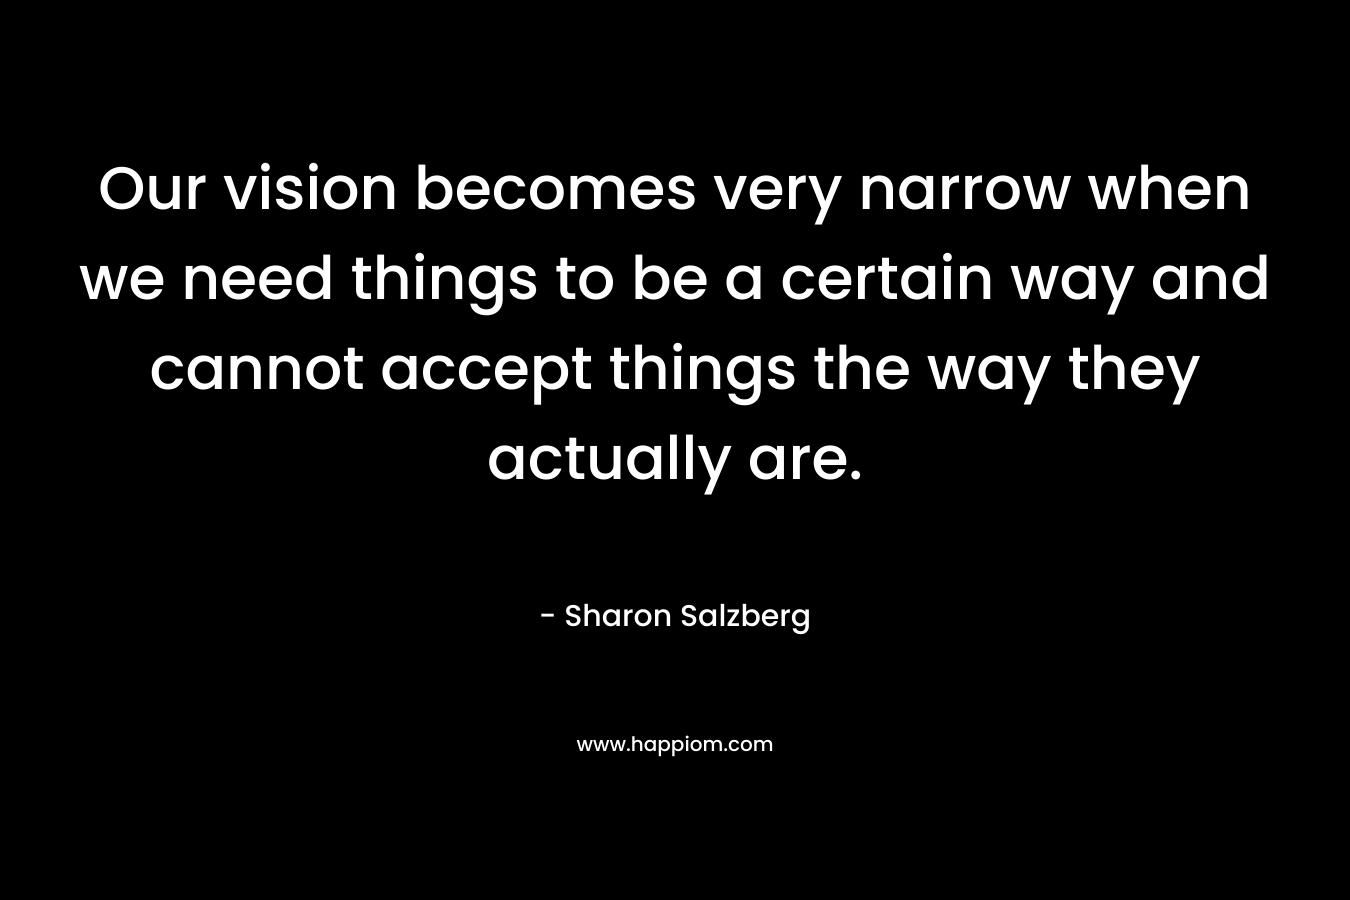 Our vision becomes very narrow when we need things to be a certain way and cannot accept things the way they actually are. – Sharon Salzberg